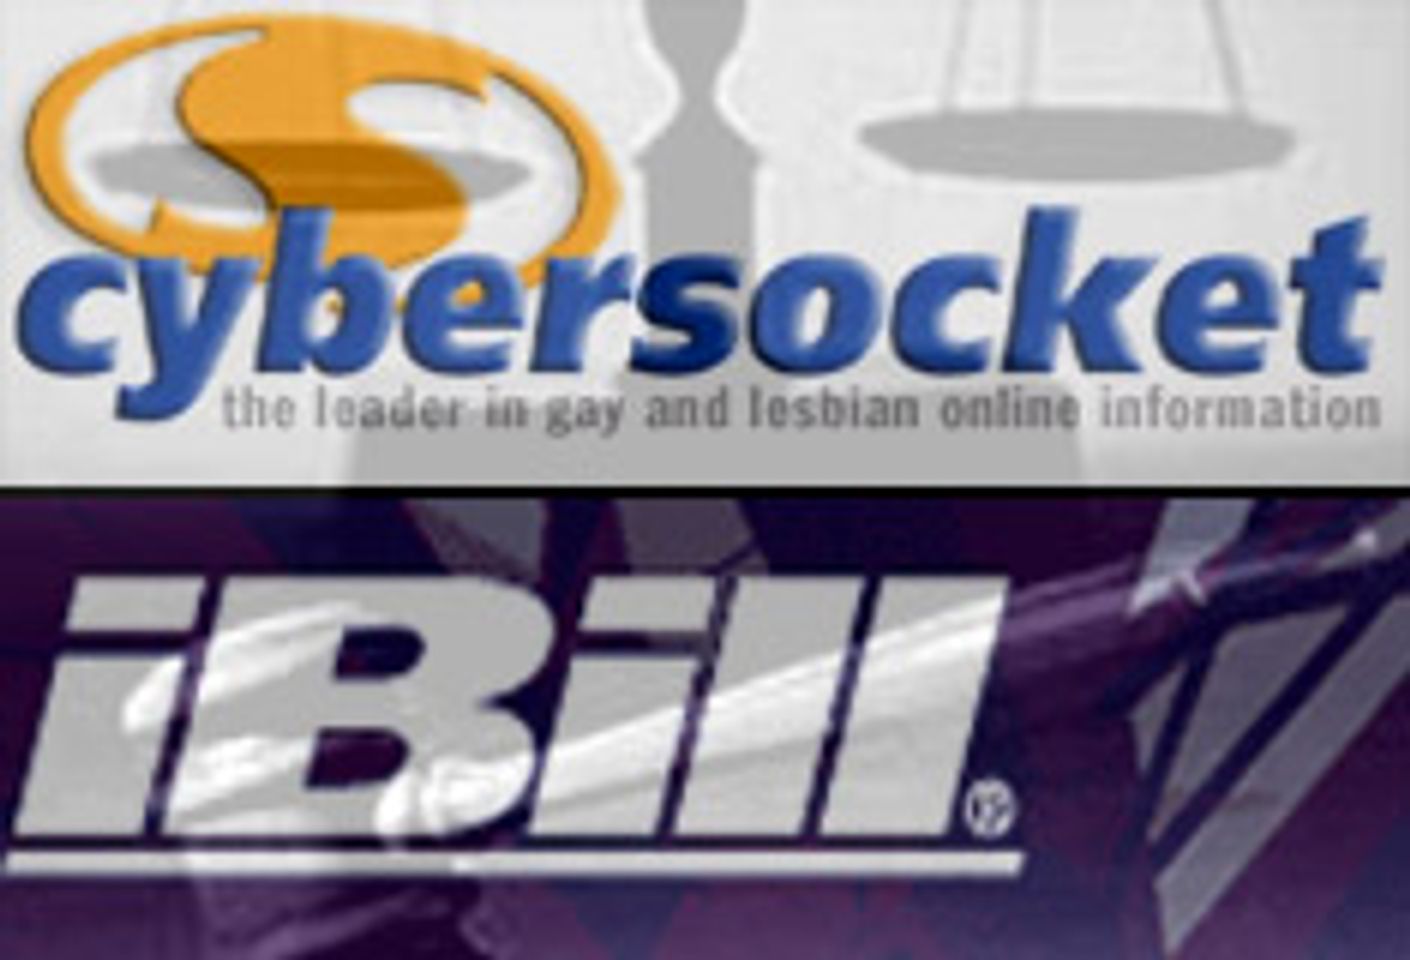 iBill Settles with Cybersocket; More Lawsuits Said Coming